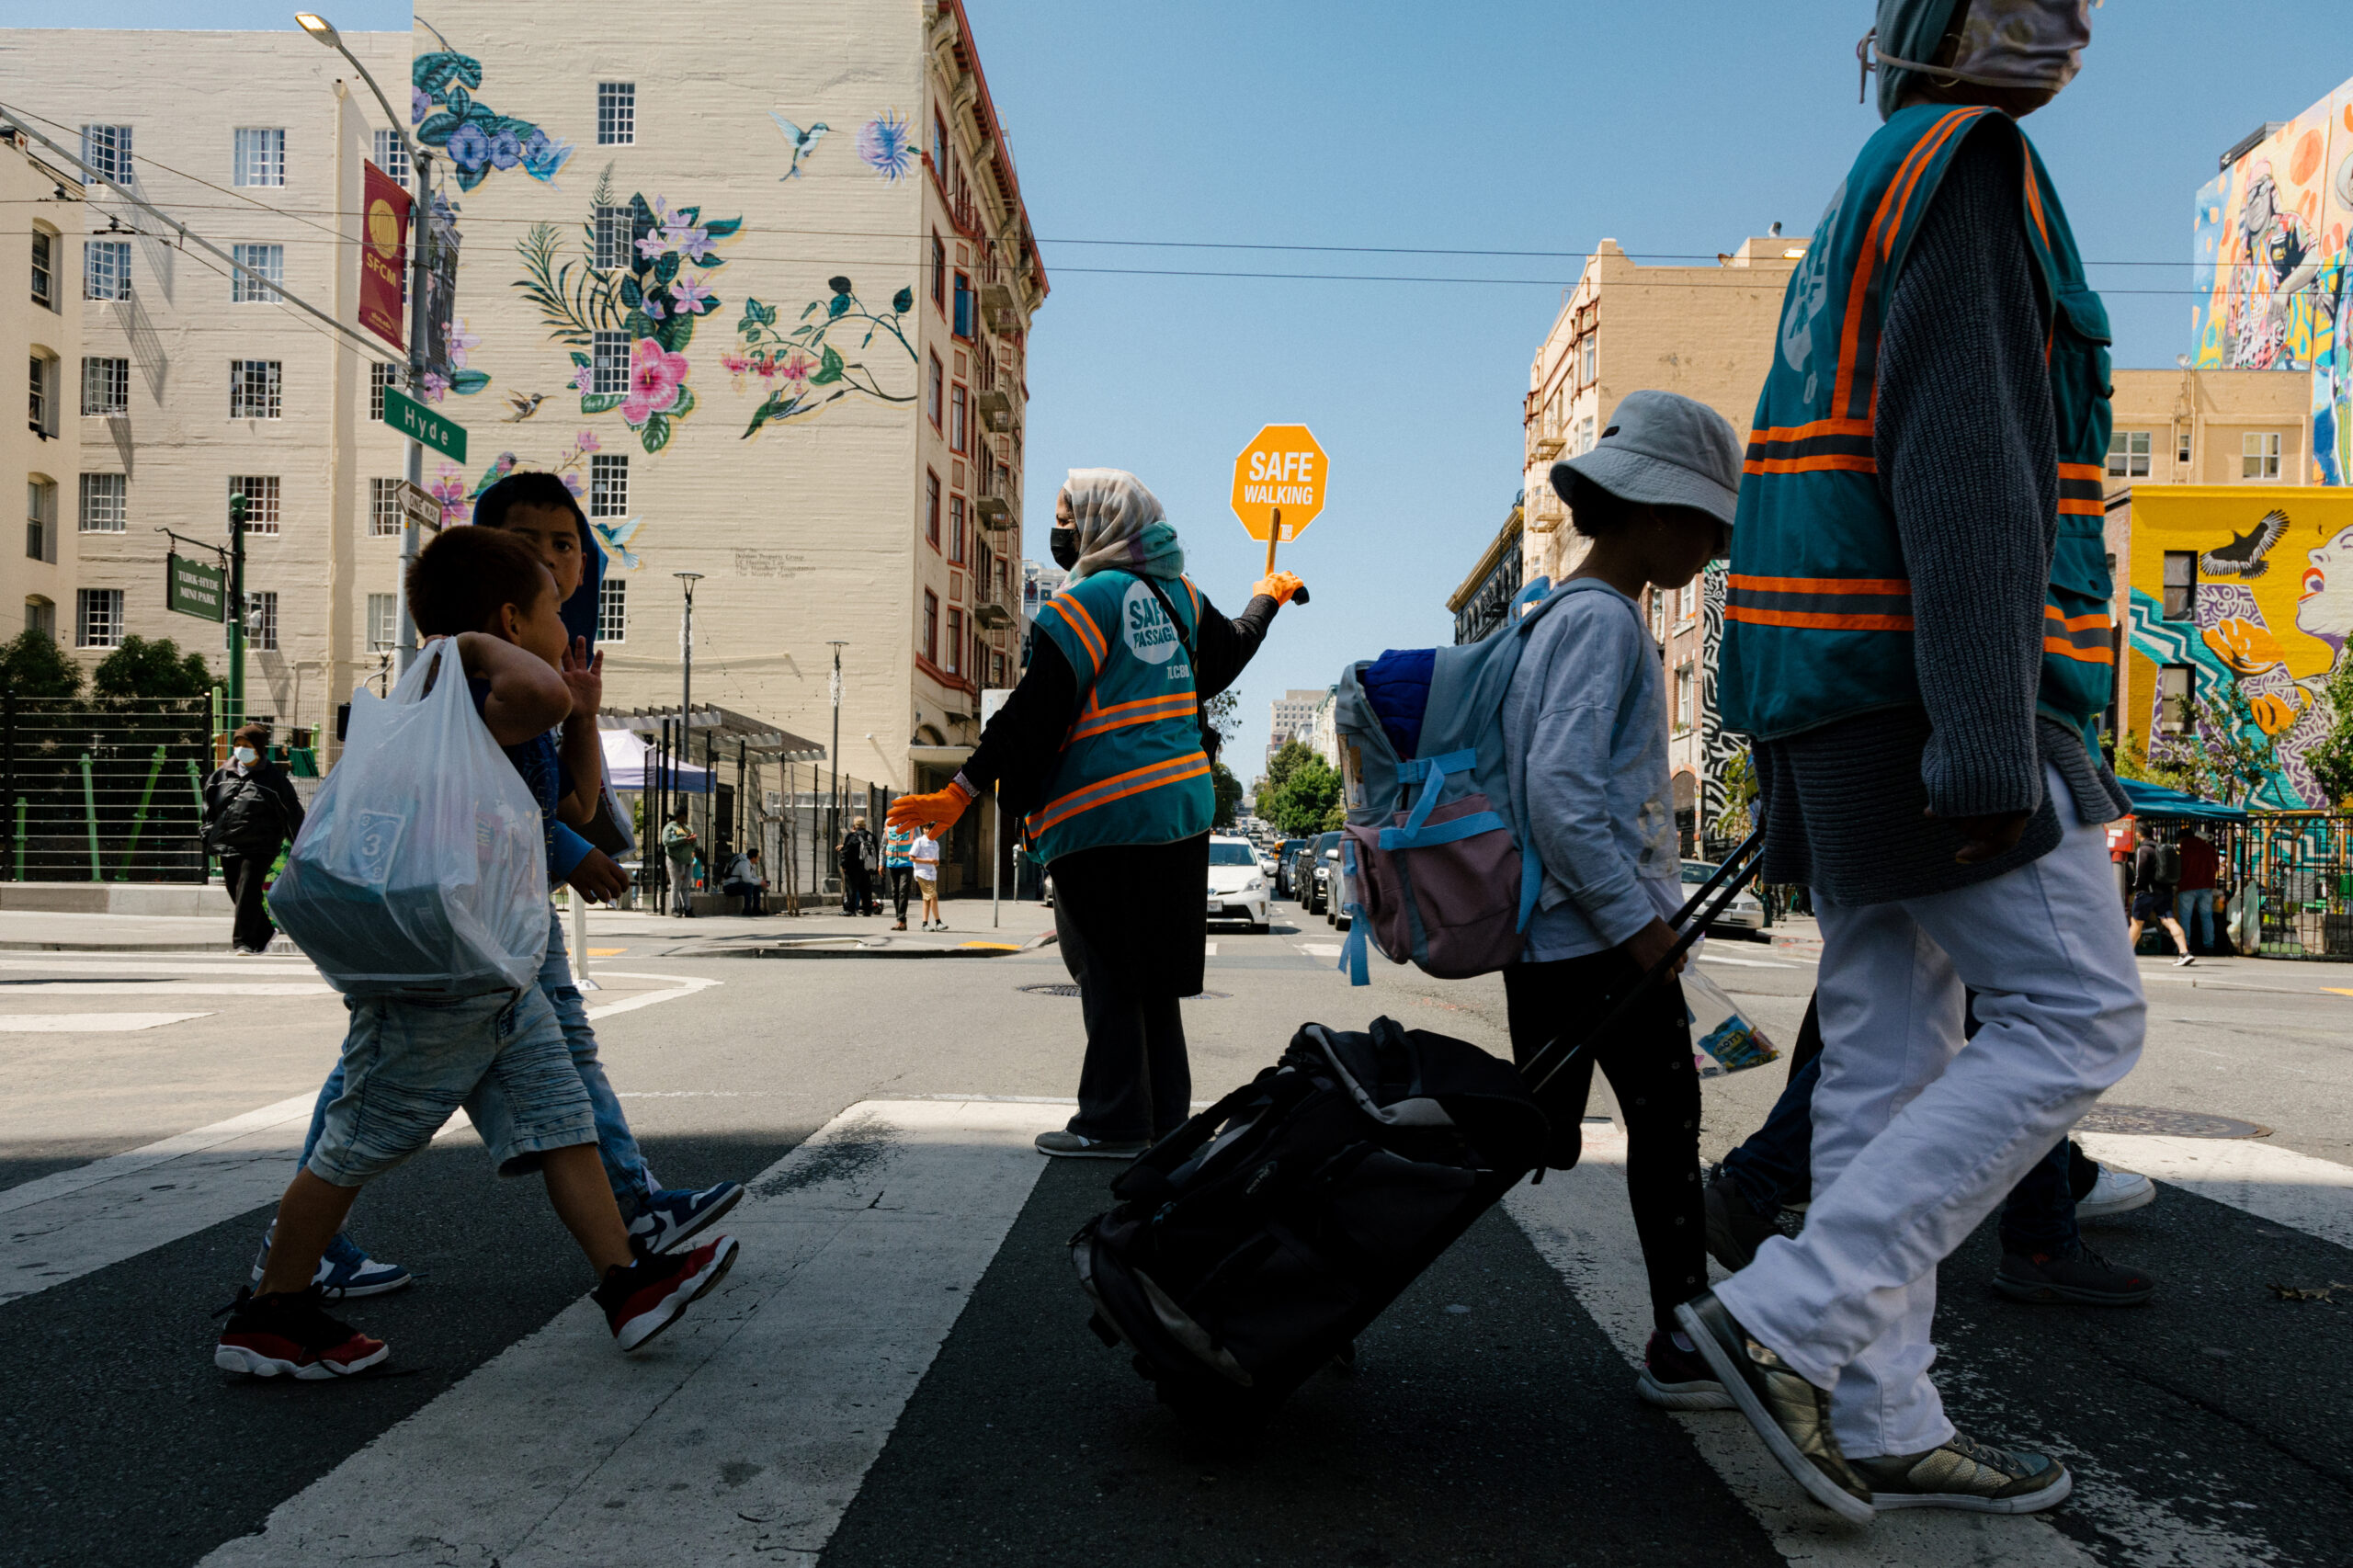 A crossing guard holds a &quot;SAFE WALKING&quot; sign as pedestrians cross a sunny urban street with vivid murals.